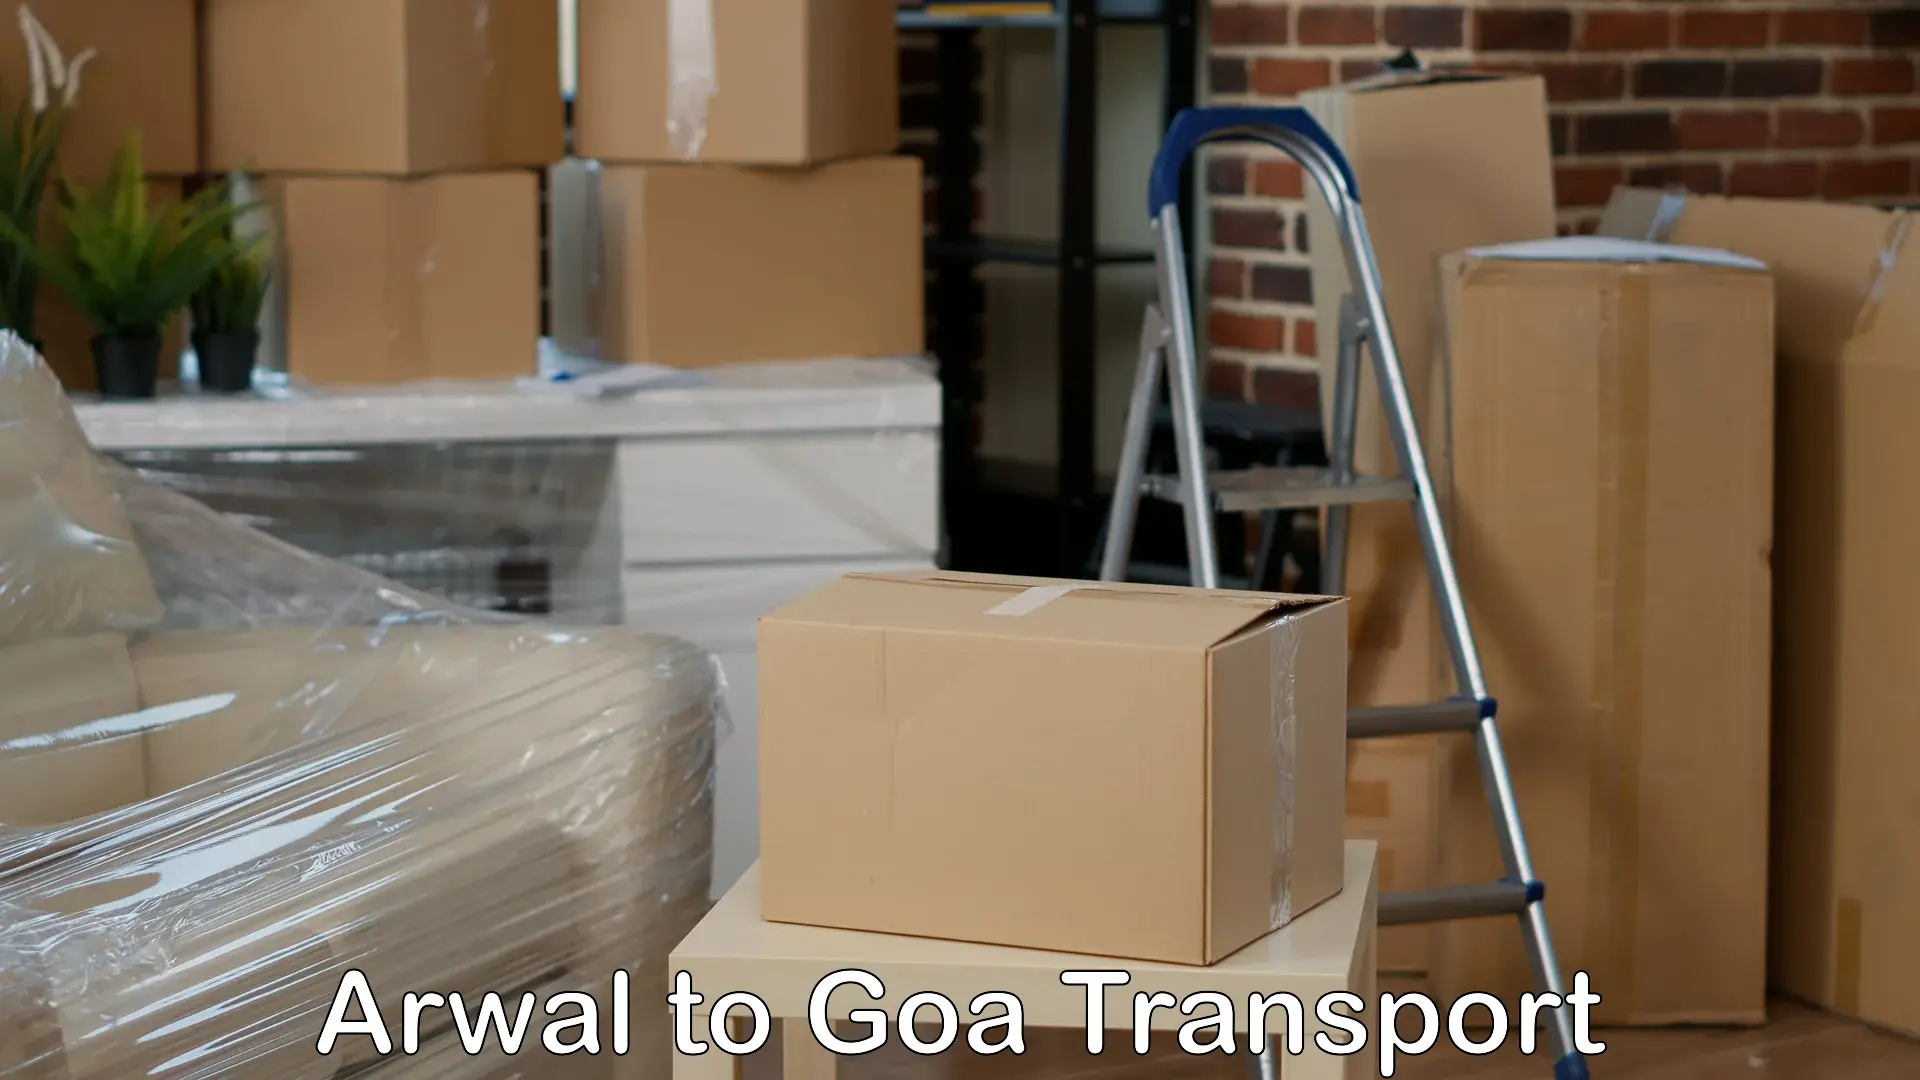 Express transport services in Arwal to Vasco da Gama